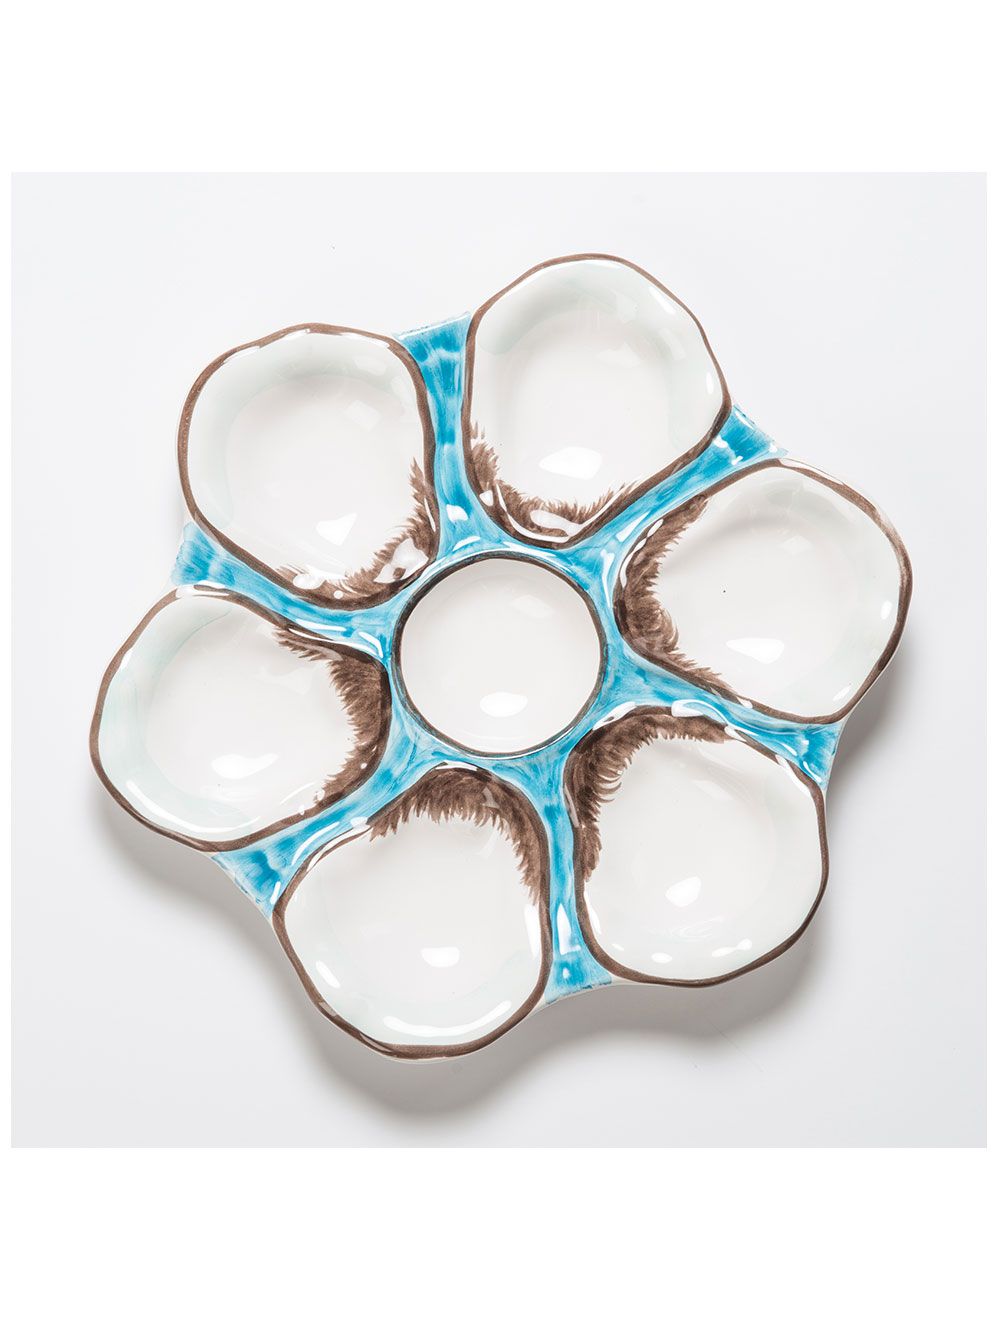 Oyster Plate - Assorted Colors